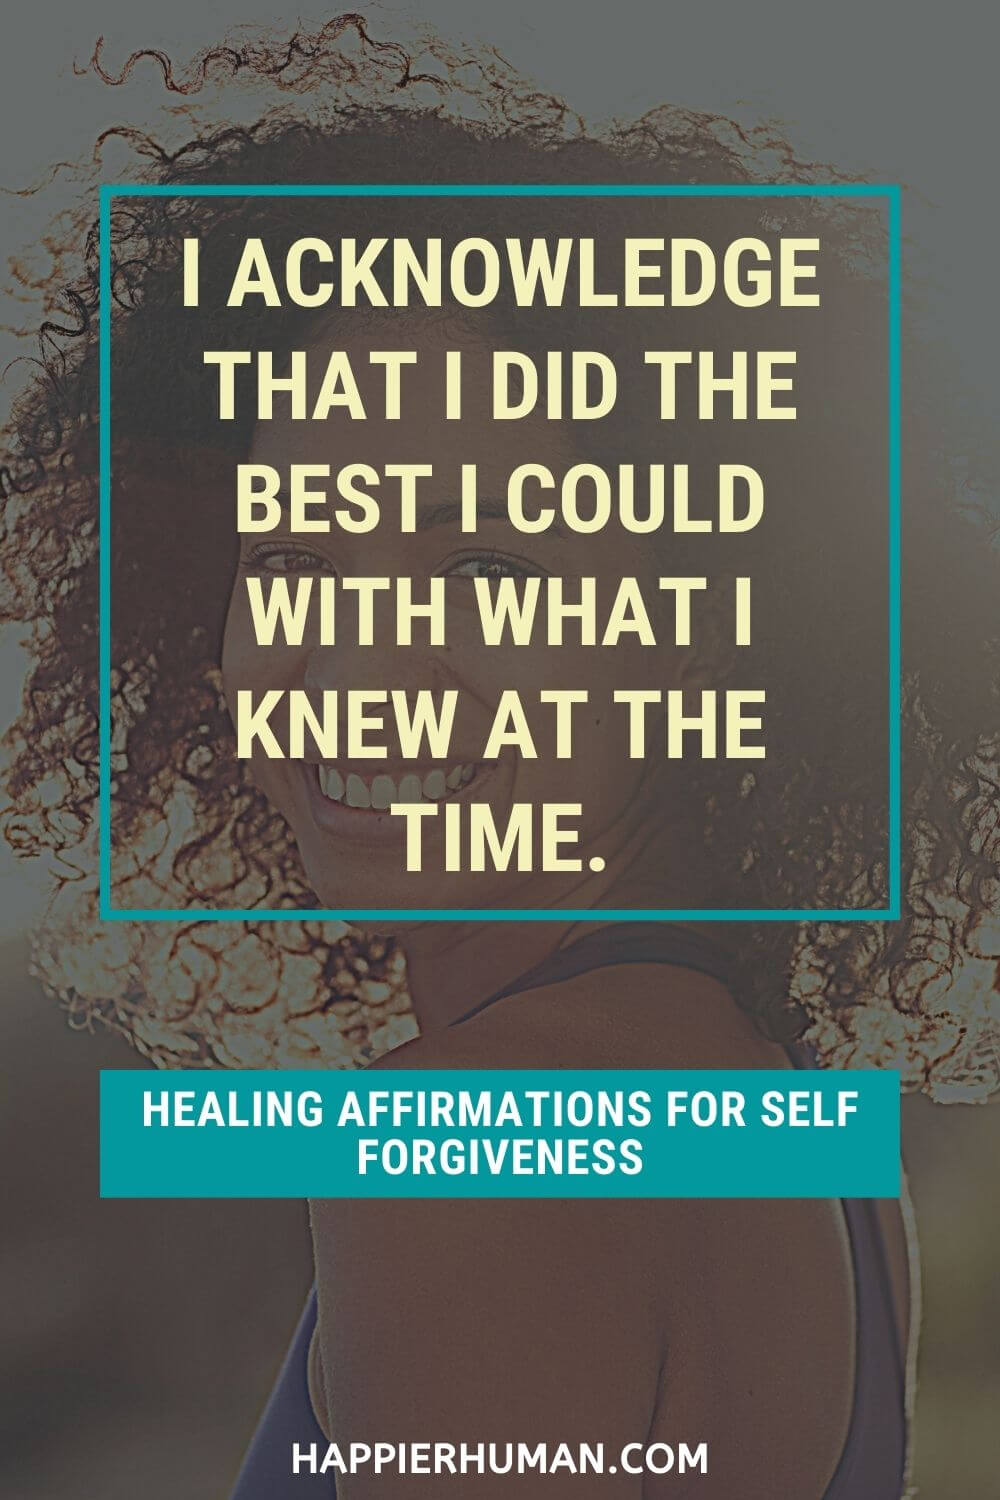 Affirmations for Forgiveness - I acknowledge that I did the best I could with what I knew at the time. | 10 self forgiveness affirmations | affirmations for releasing guilt | affirmations to let go of anger